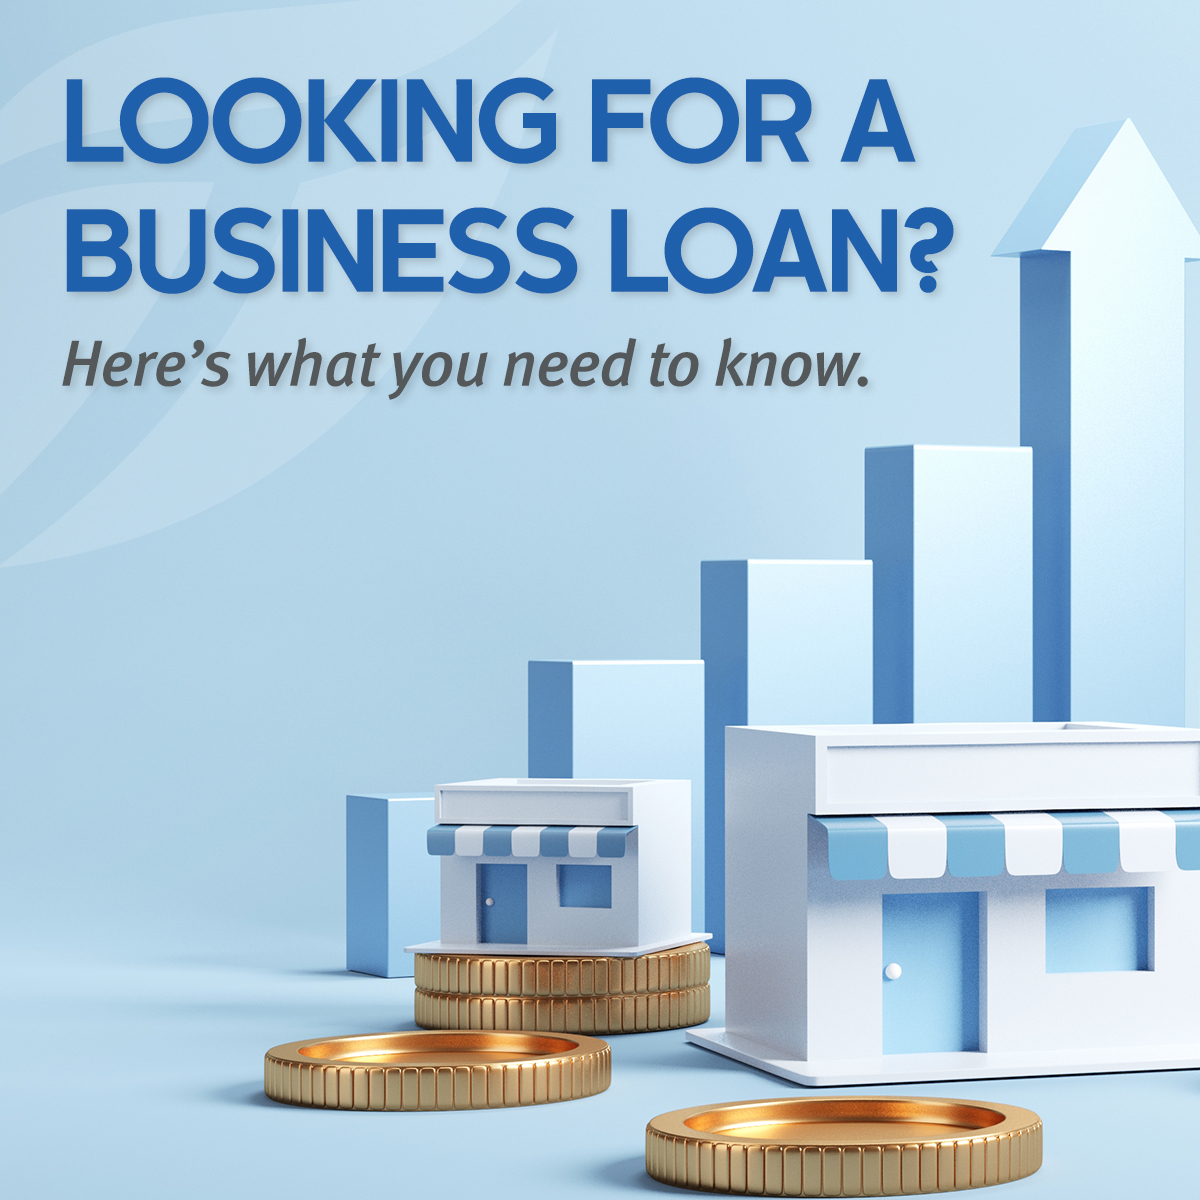 5 Steps to Take When Applying for a Business Loan